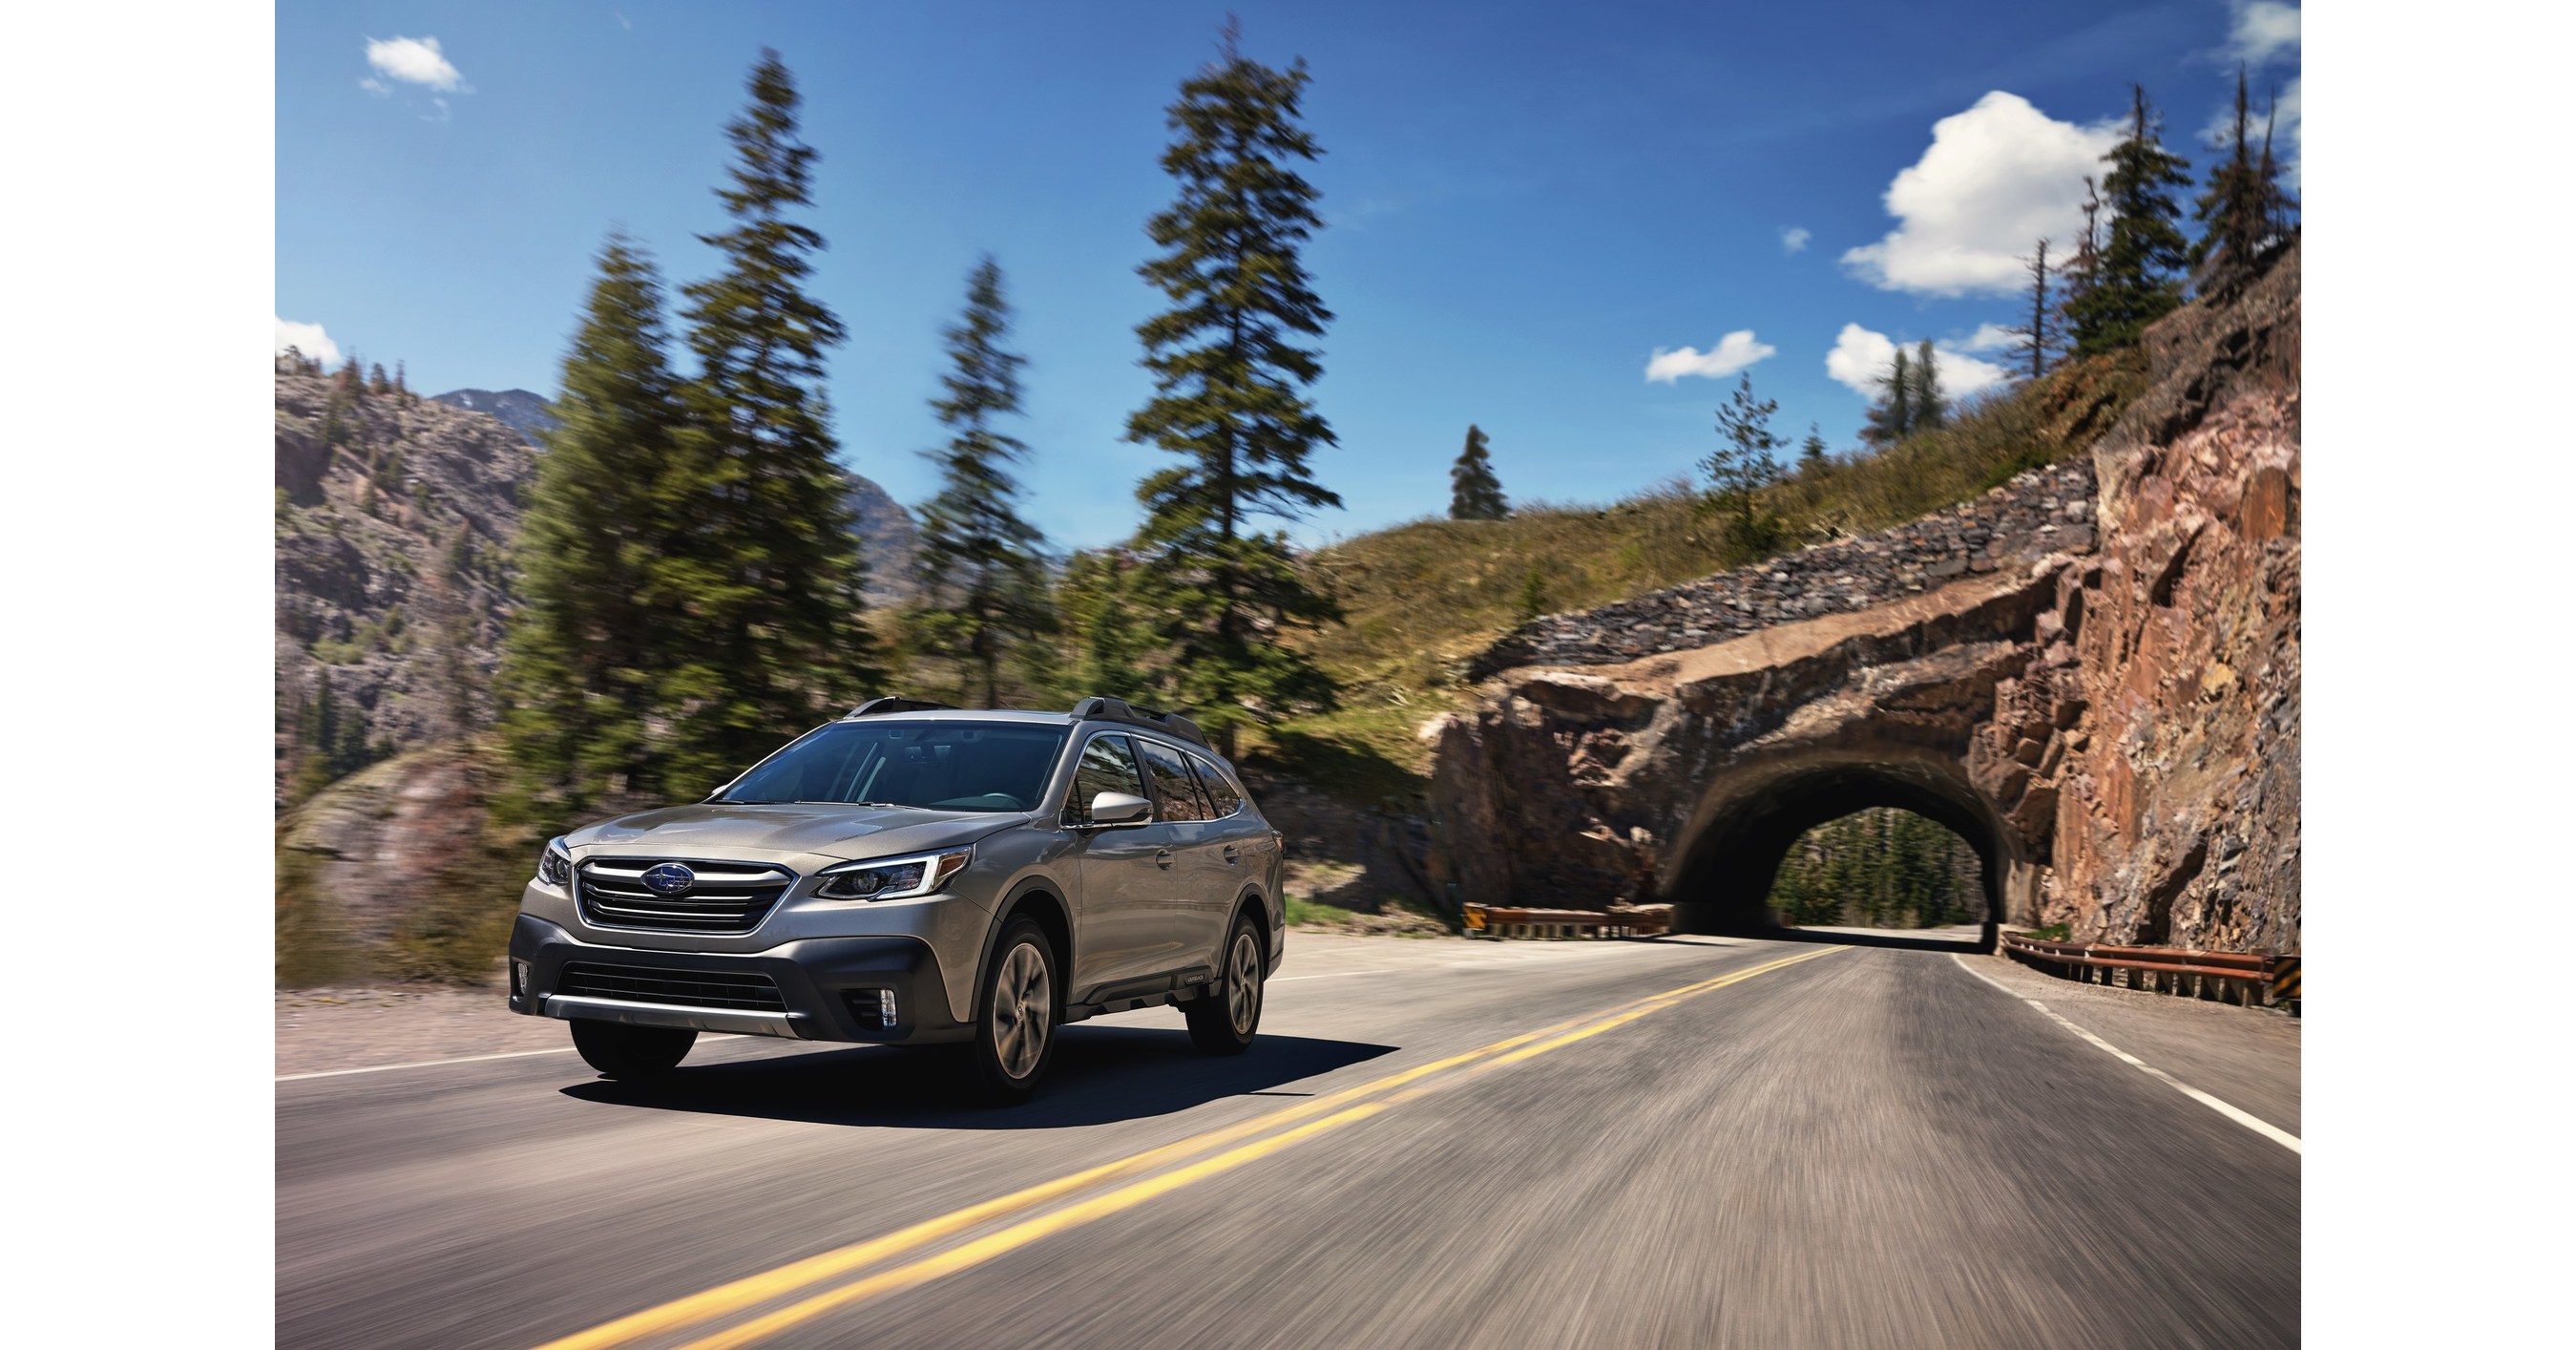 2020 And Legacy Models Subaru Announces Outback For Pricing